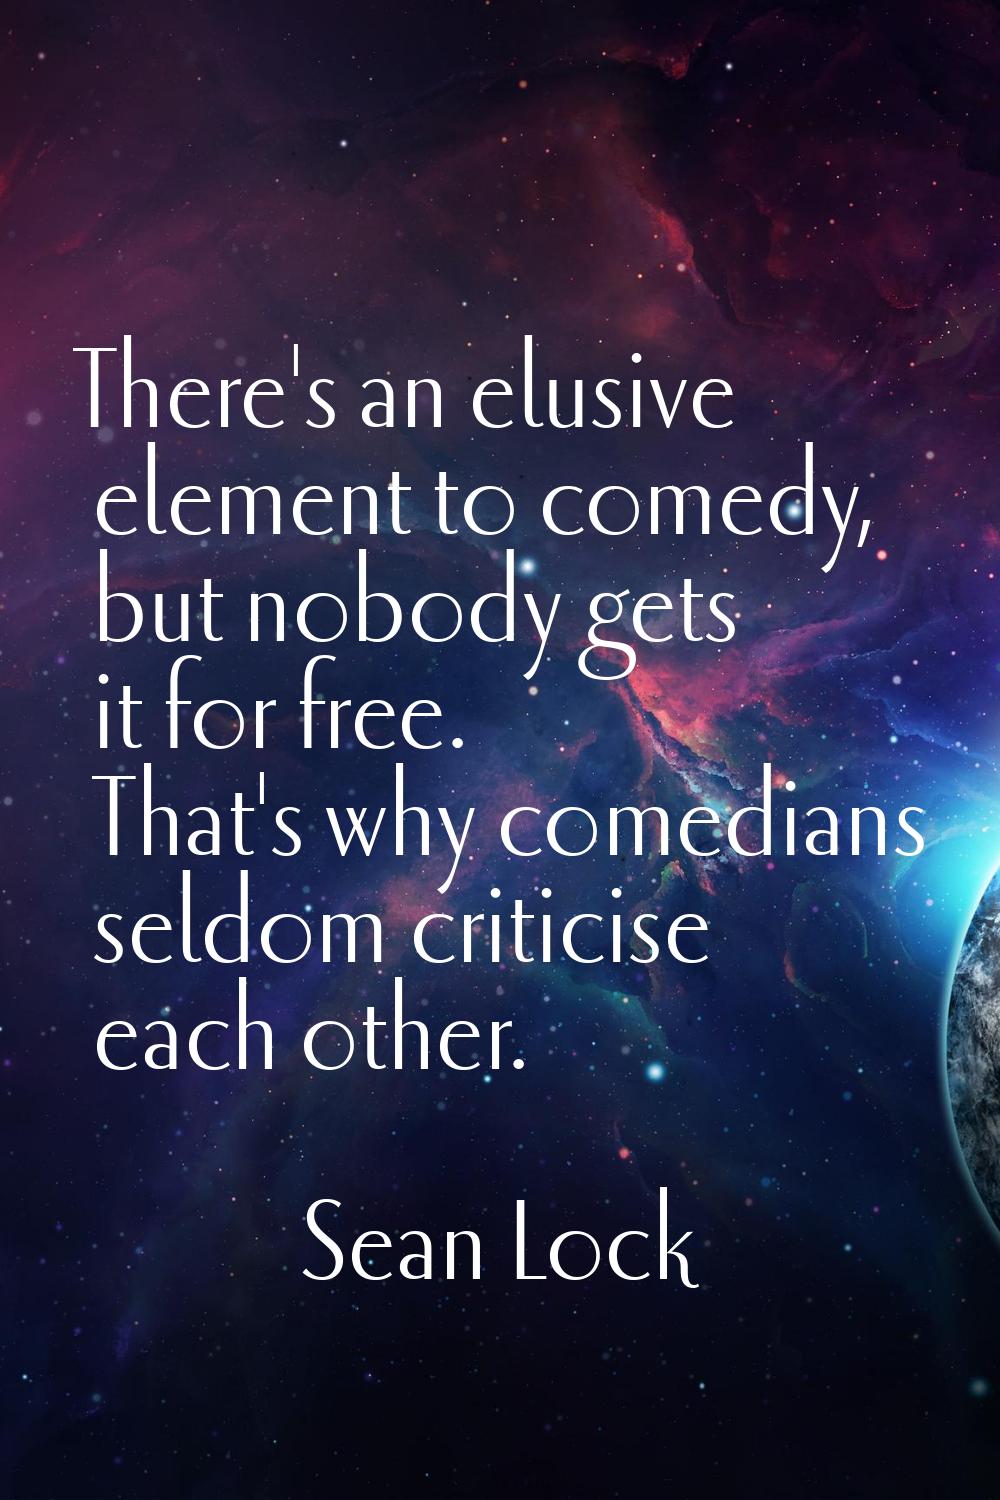 There's an elusive element to comedy, but nobody gets it for free. That's why comedians seldom crit